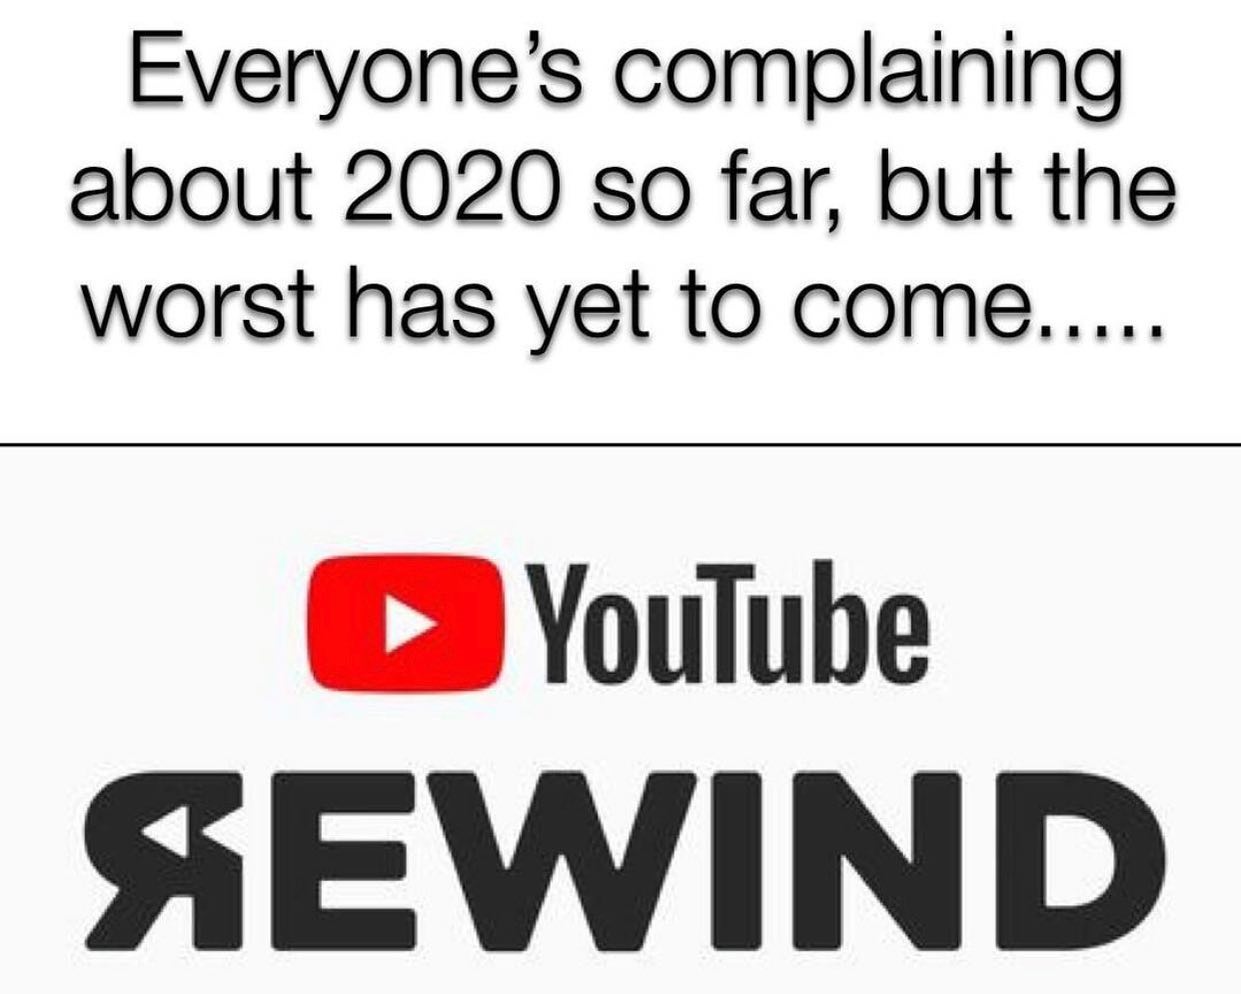 dank memes - angle - Everyone's complaining about 2020 so far, but the worst has yet to come..... YouTube Sewind